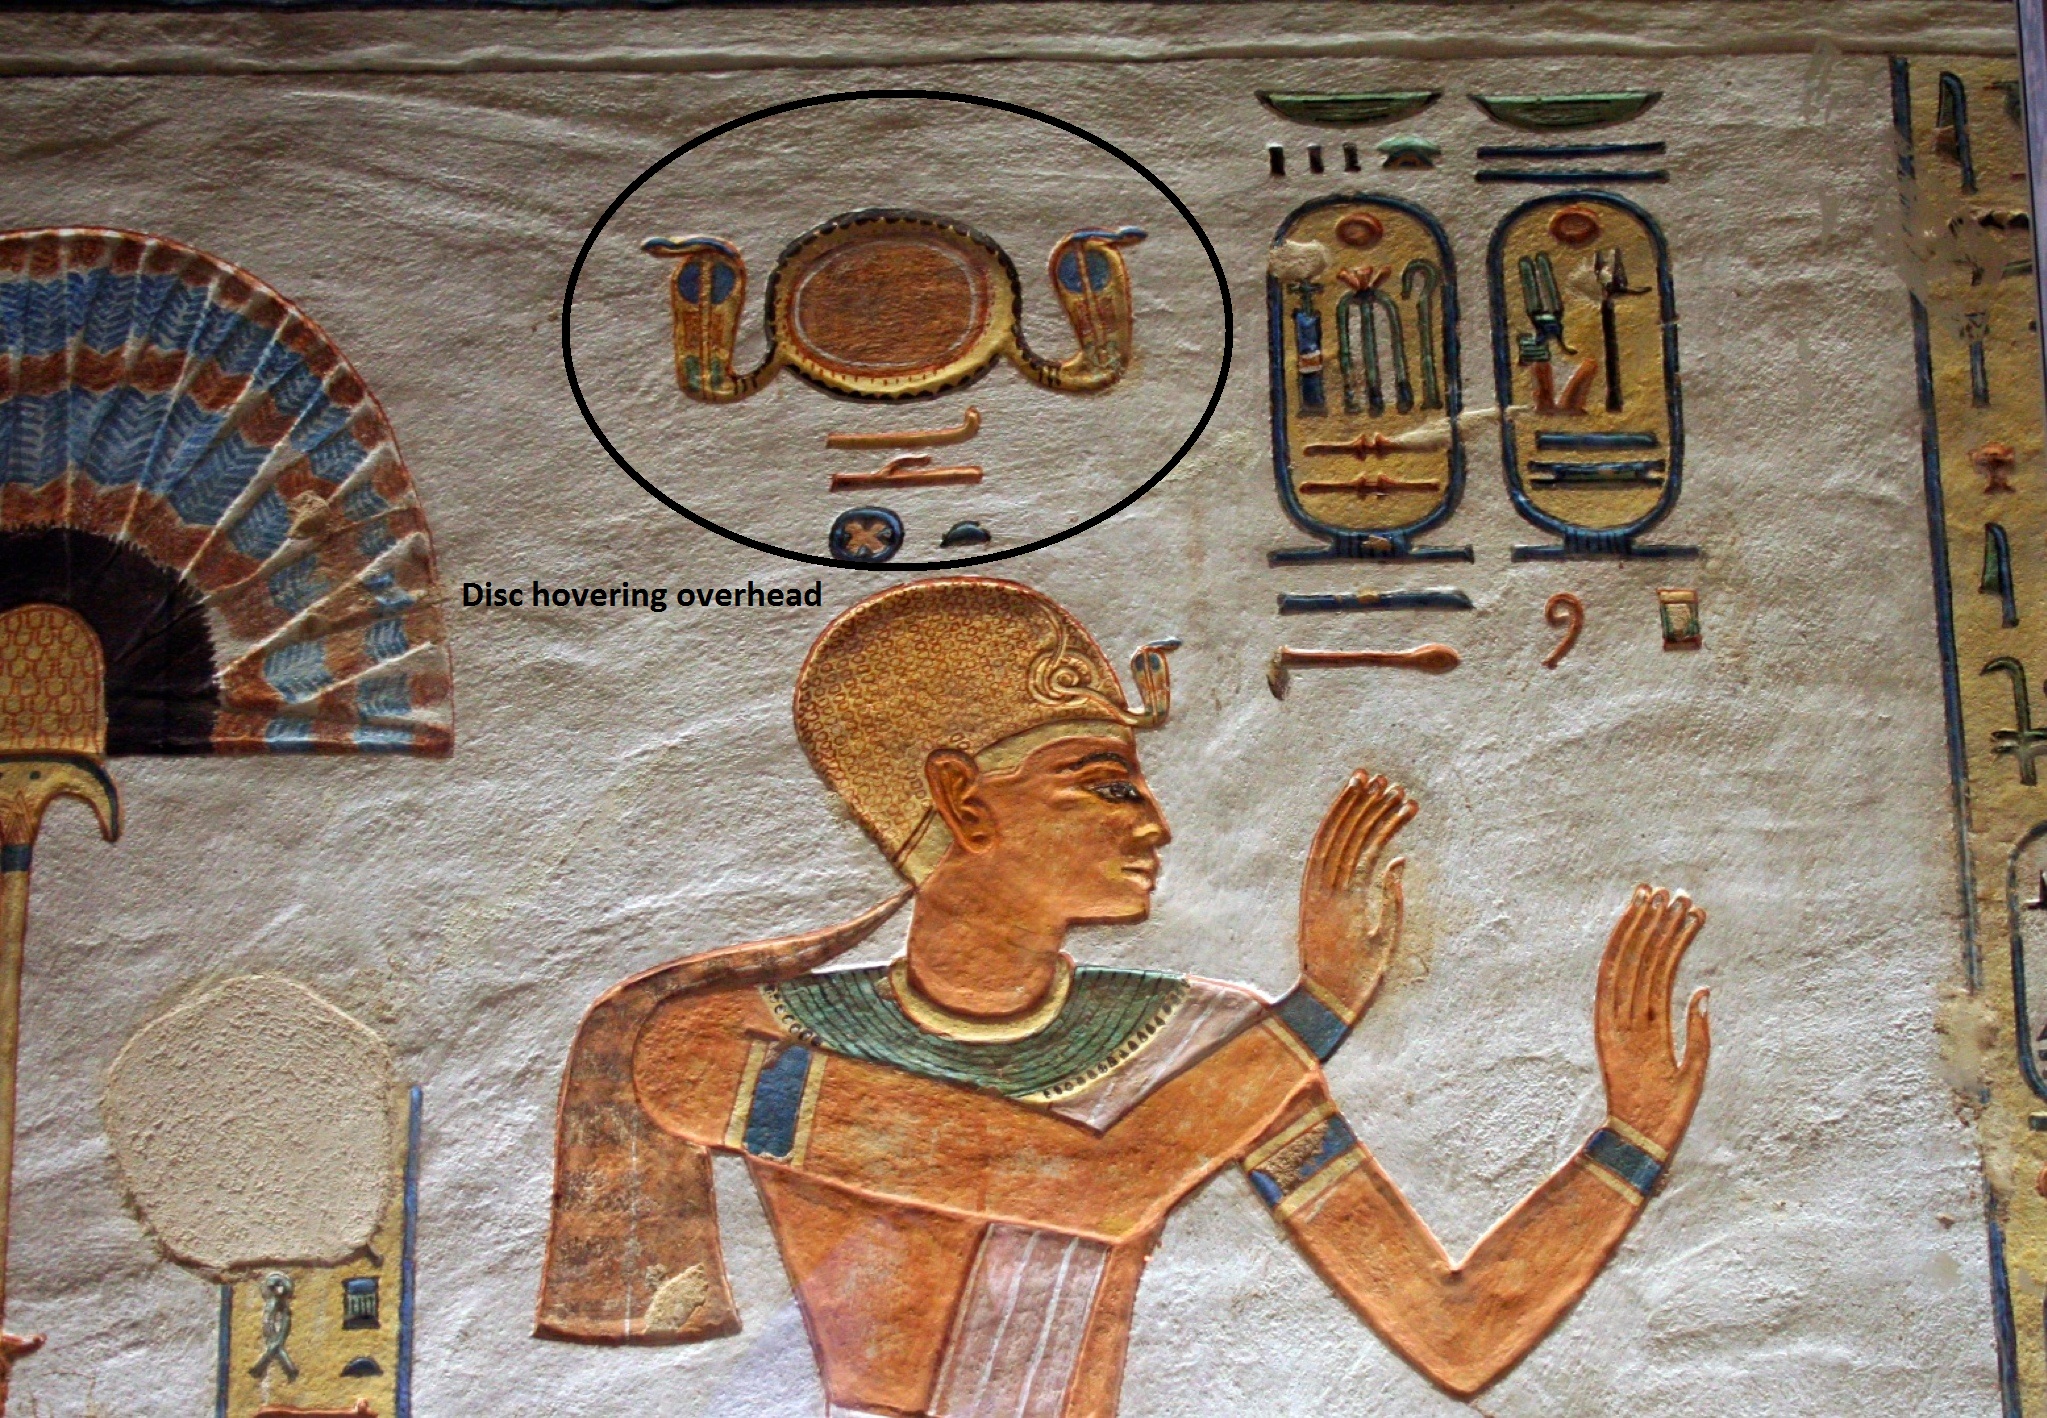 Variable of the Day, Ancient Egypt: Disc hovering overhead